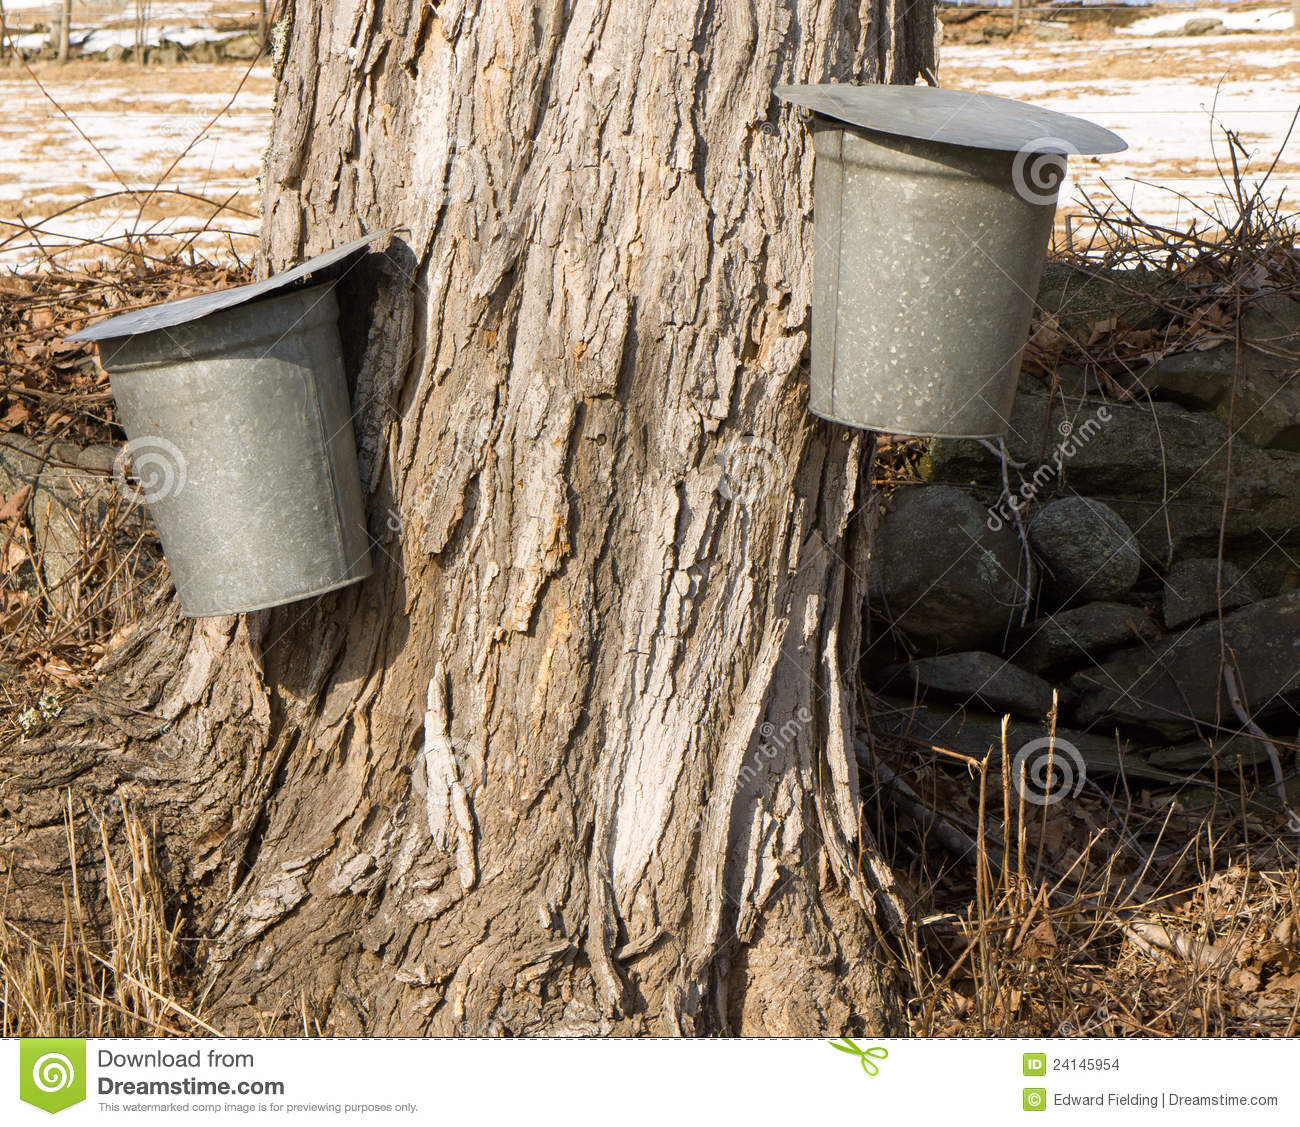 Late Winter Is Maple Sugaring Time In New England Sugar Maples Are    